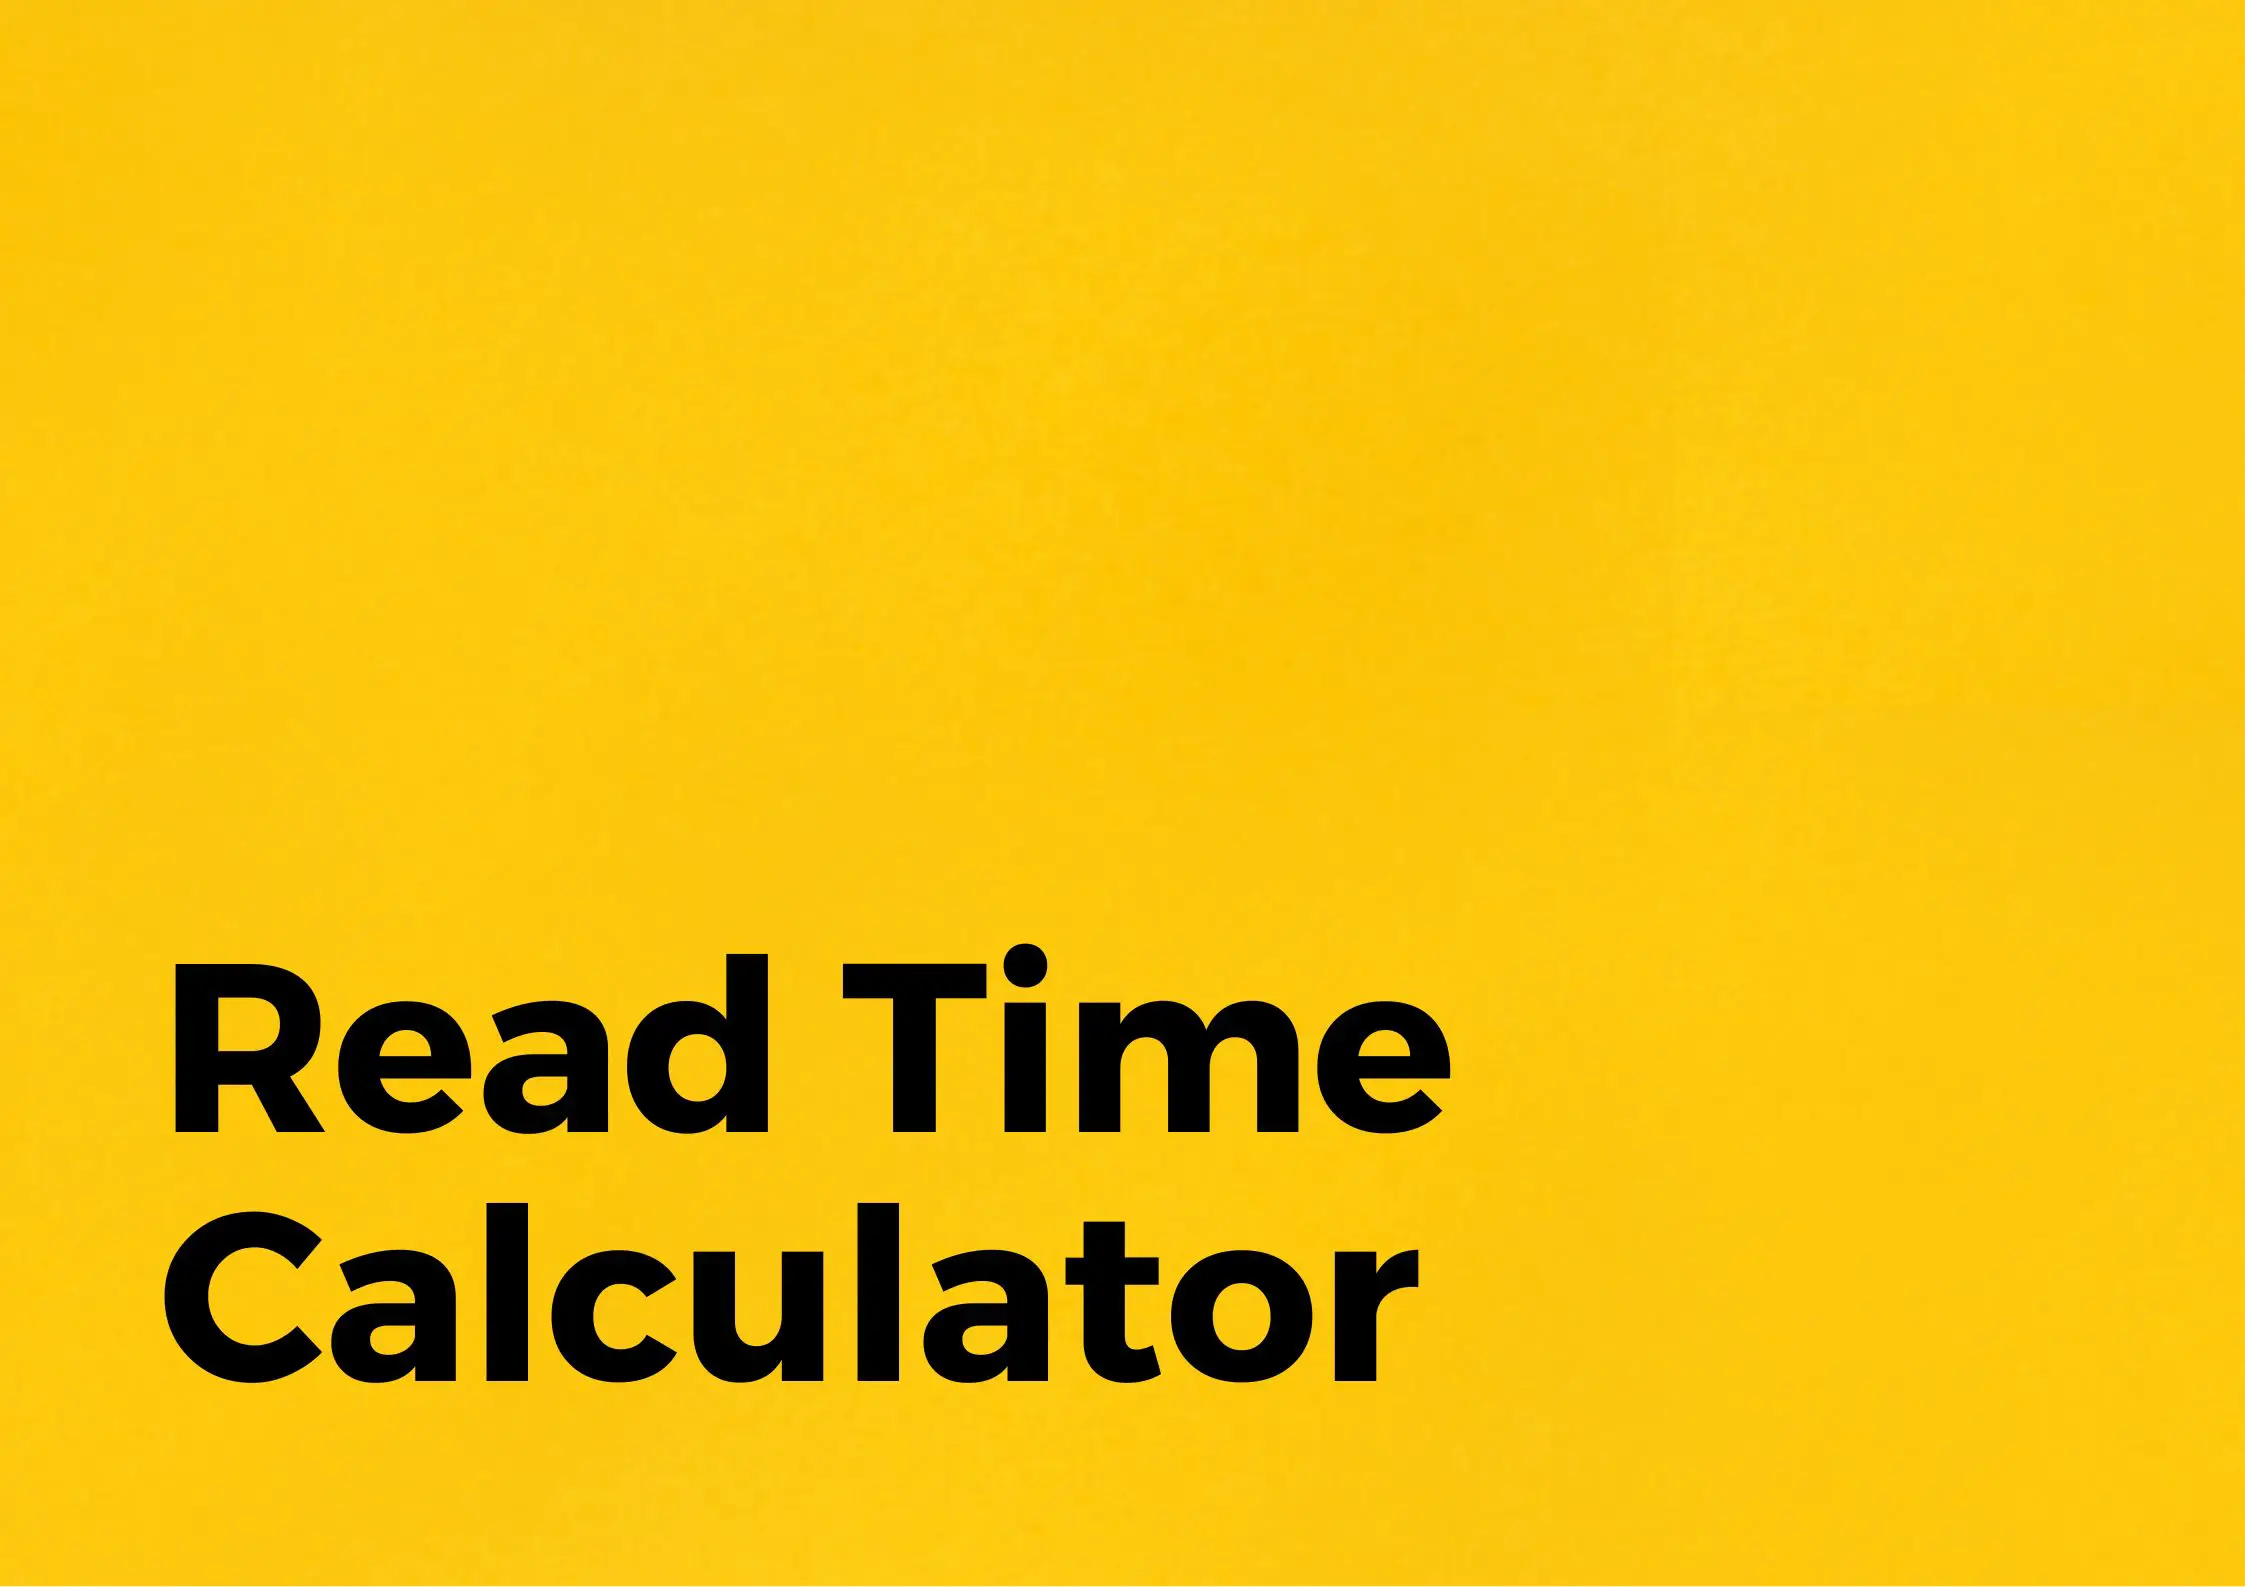 Words To Time Converter - The Read Time